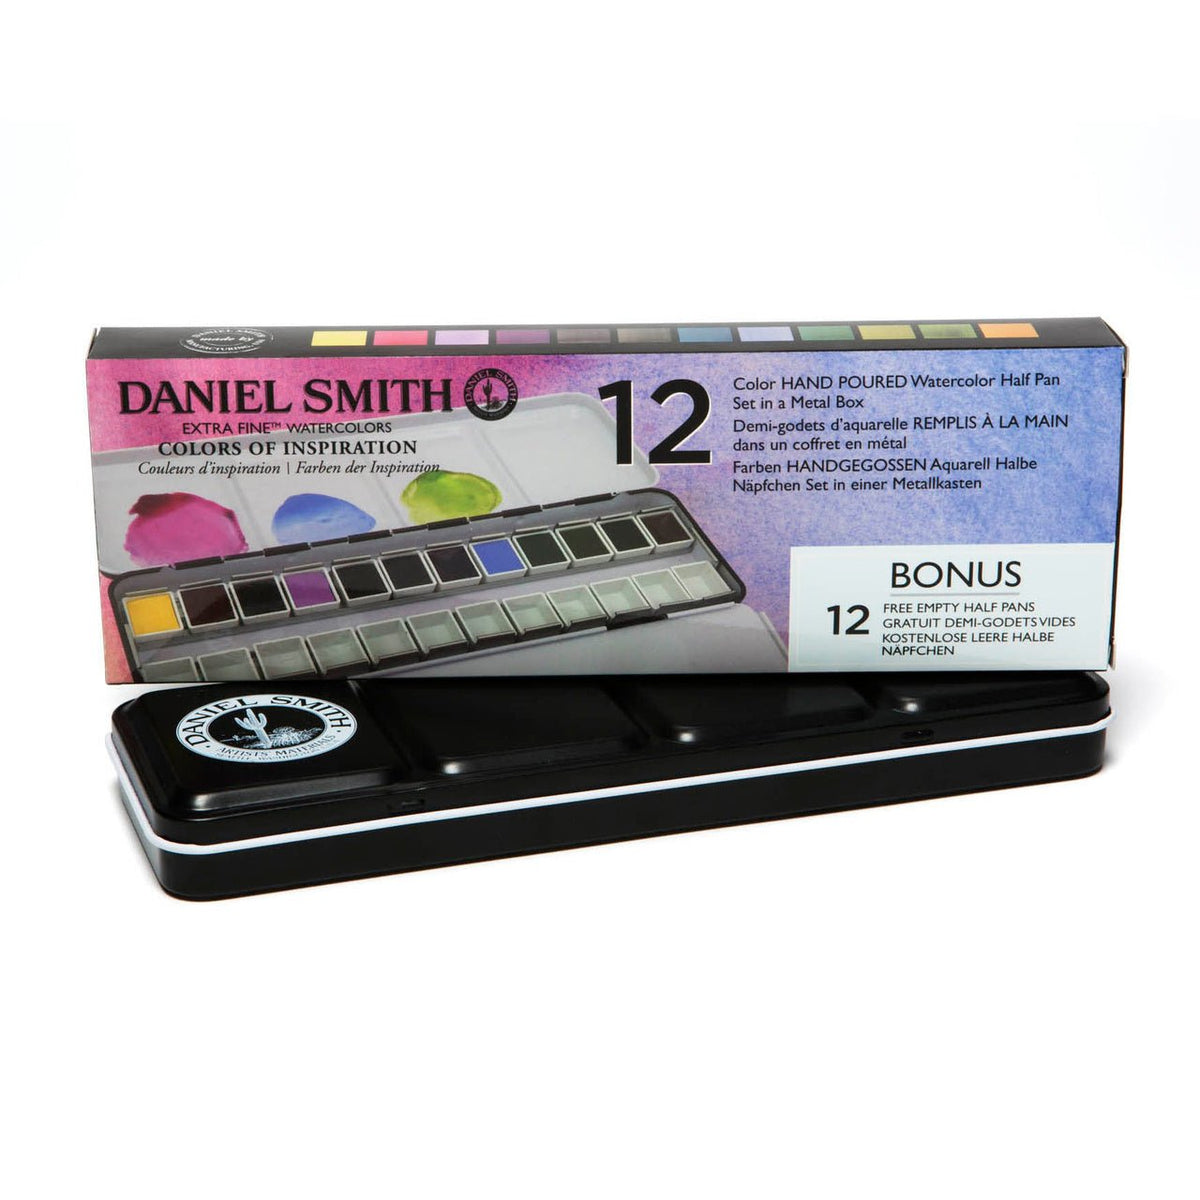 Daniel Smith Extra Fine Watercolor Set - 12 Color of Inspiration Hand Poured Half Pan Set in a METAL BOX with BONUS 12 Empty Half Pans - merriartist.com